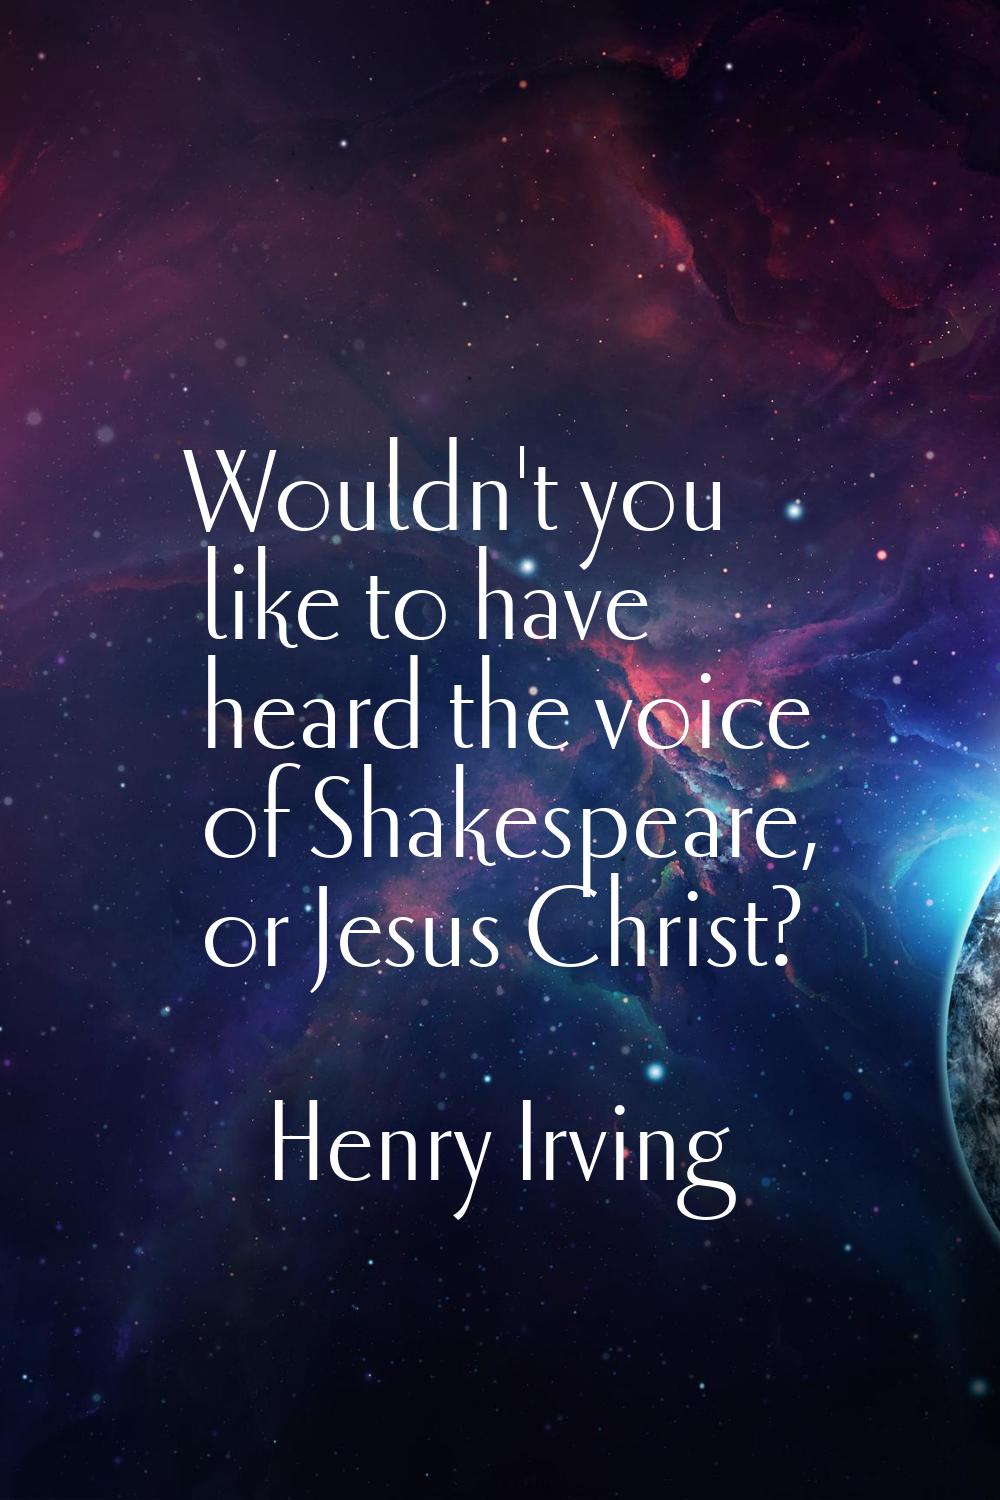 Wouldn't you like to have heard the voice of Shakespeare, or Jesus Christ?